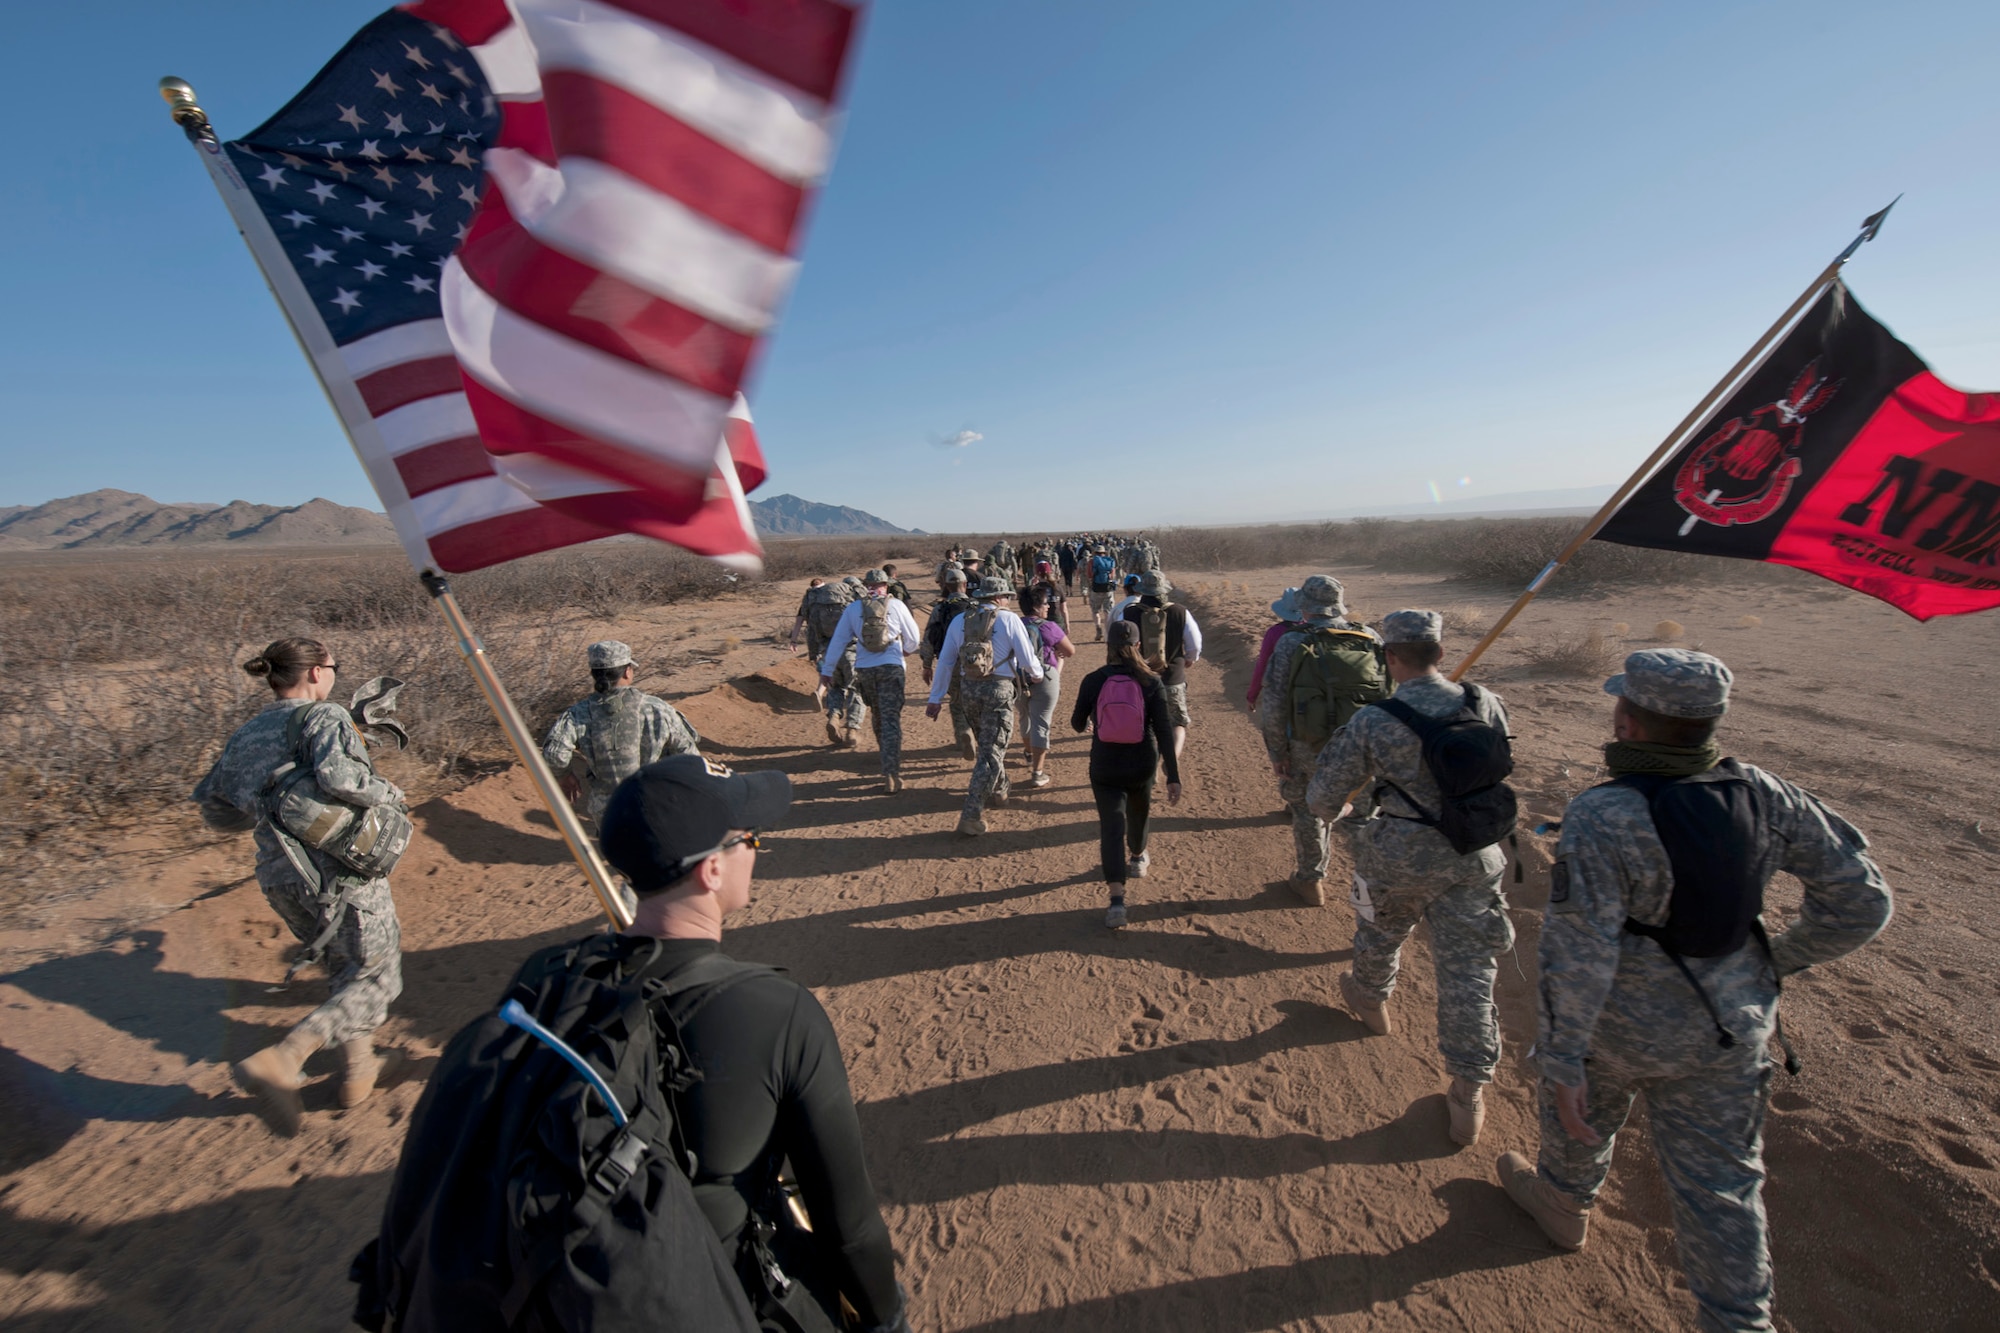 Participants of the 22nd Annual Bataan Memorial Death March trek through the 26.2-mile desert trail March 27, 2011, at White Sands Missile Range, New Mexico. The event, attended by a record number of more than 6,000 marchers, commemorated the original Bataan Death March, which occurred in the Philippines during World War II. (U.S. Air Force photo/Airman 1st Class Joshua Turner) 
